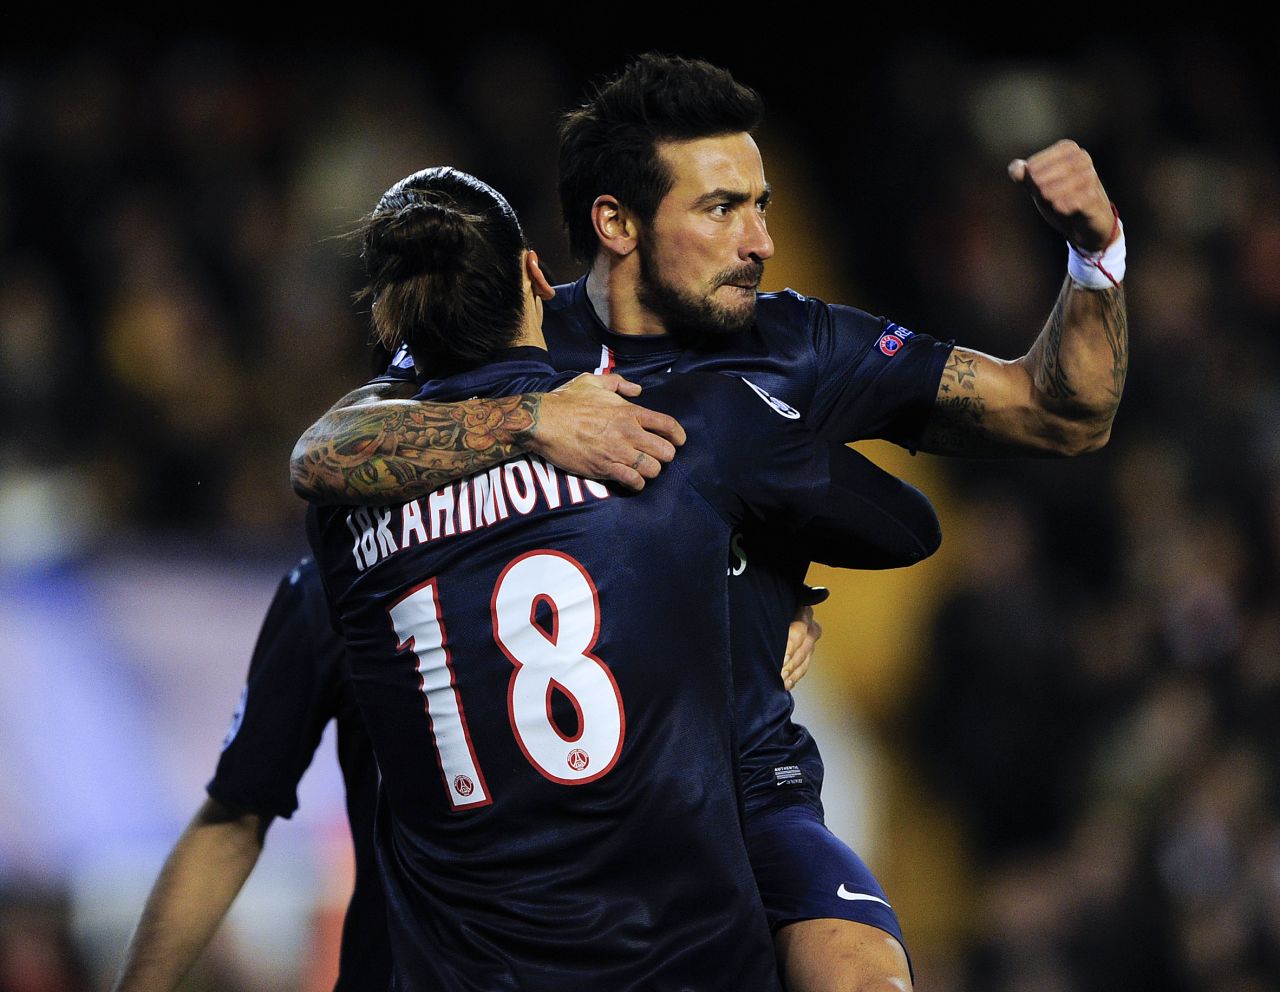 Ezequiel Lavezzi celebrates his early strike for Paris Saint-Germain with teammate Zlatan Ibrahimovic. The Argentine struck in the 10th minute and has now scored in each of his past three Champions League games.